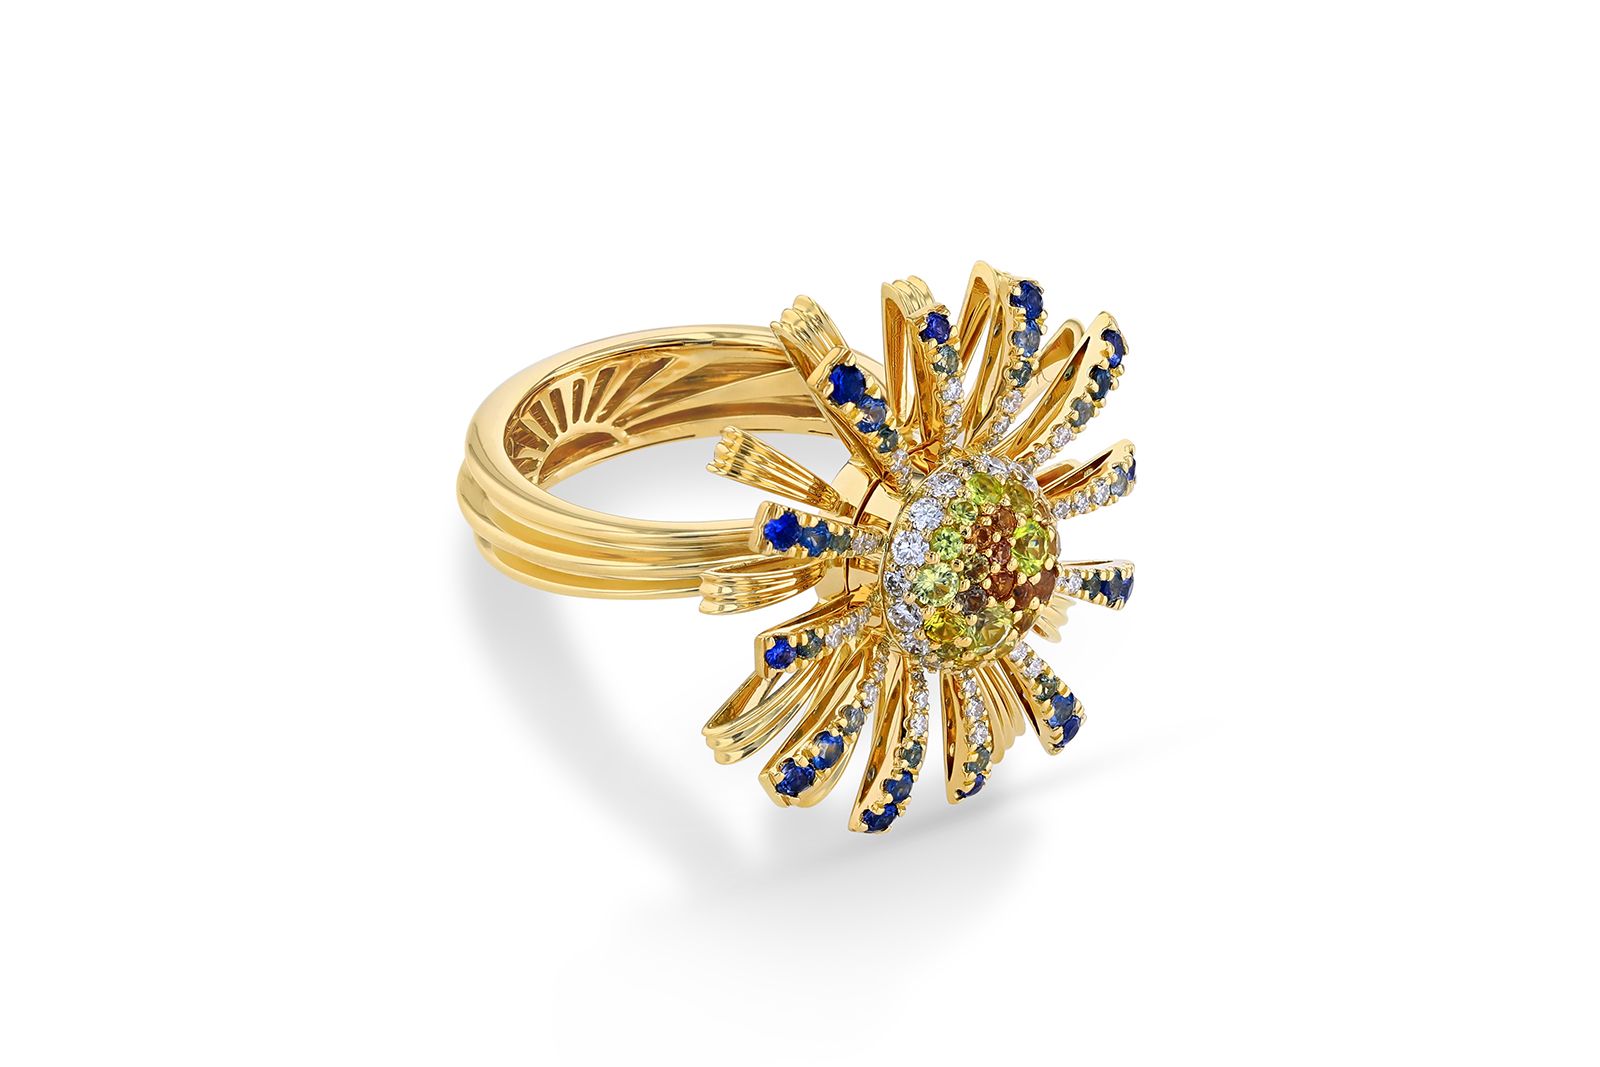 TOKTAM Sun ring with diamonds and sapphires from the Kahkeshan collection 